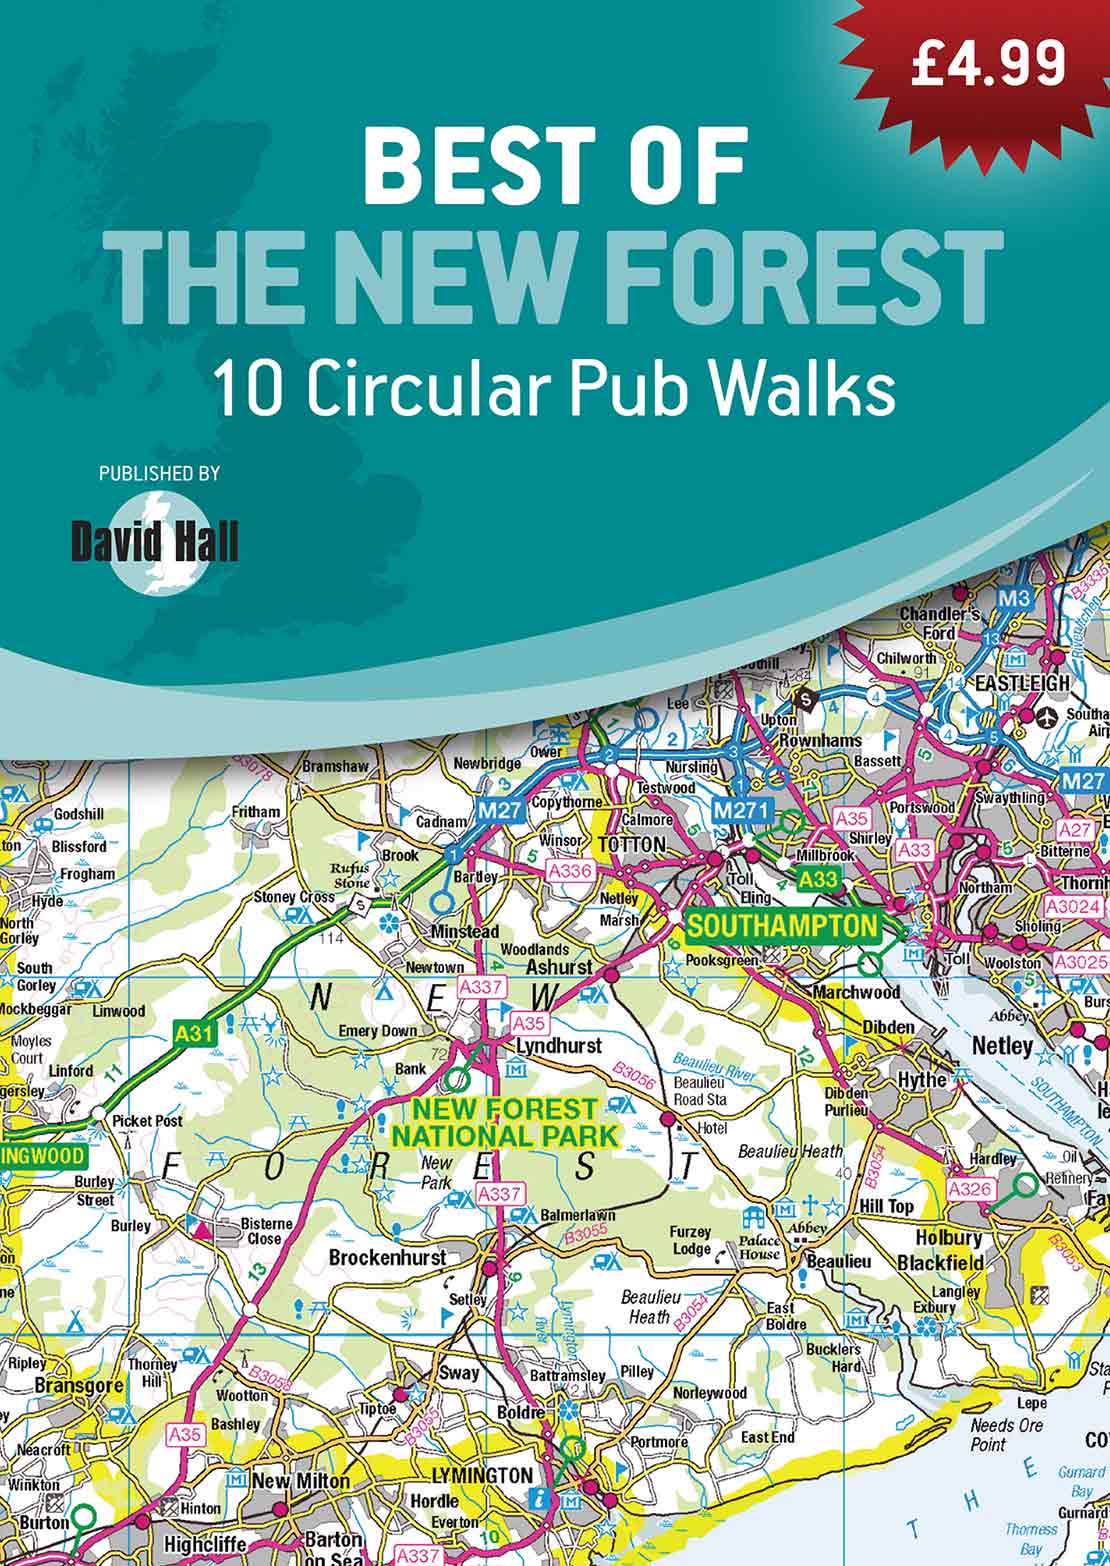 Best of the New Forest - 10 Circular Pub Walks Book image